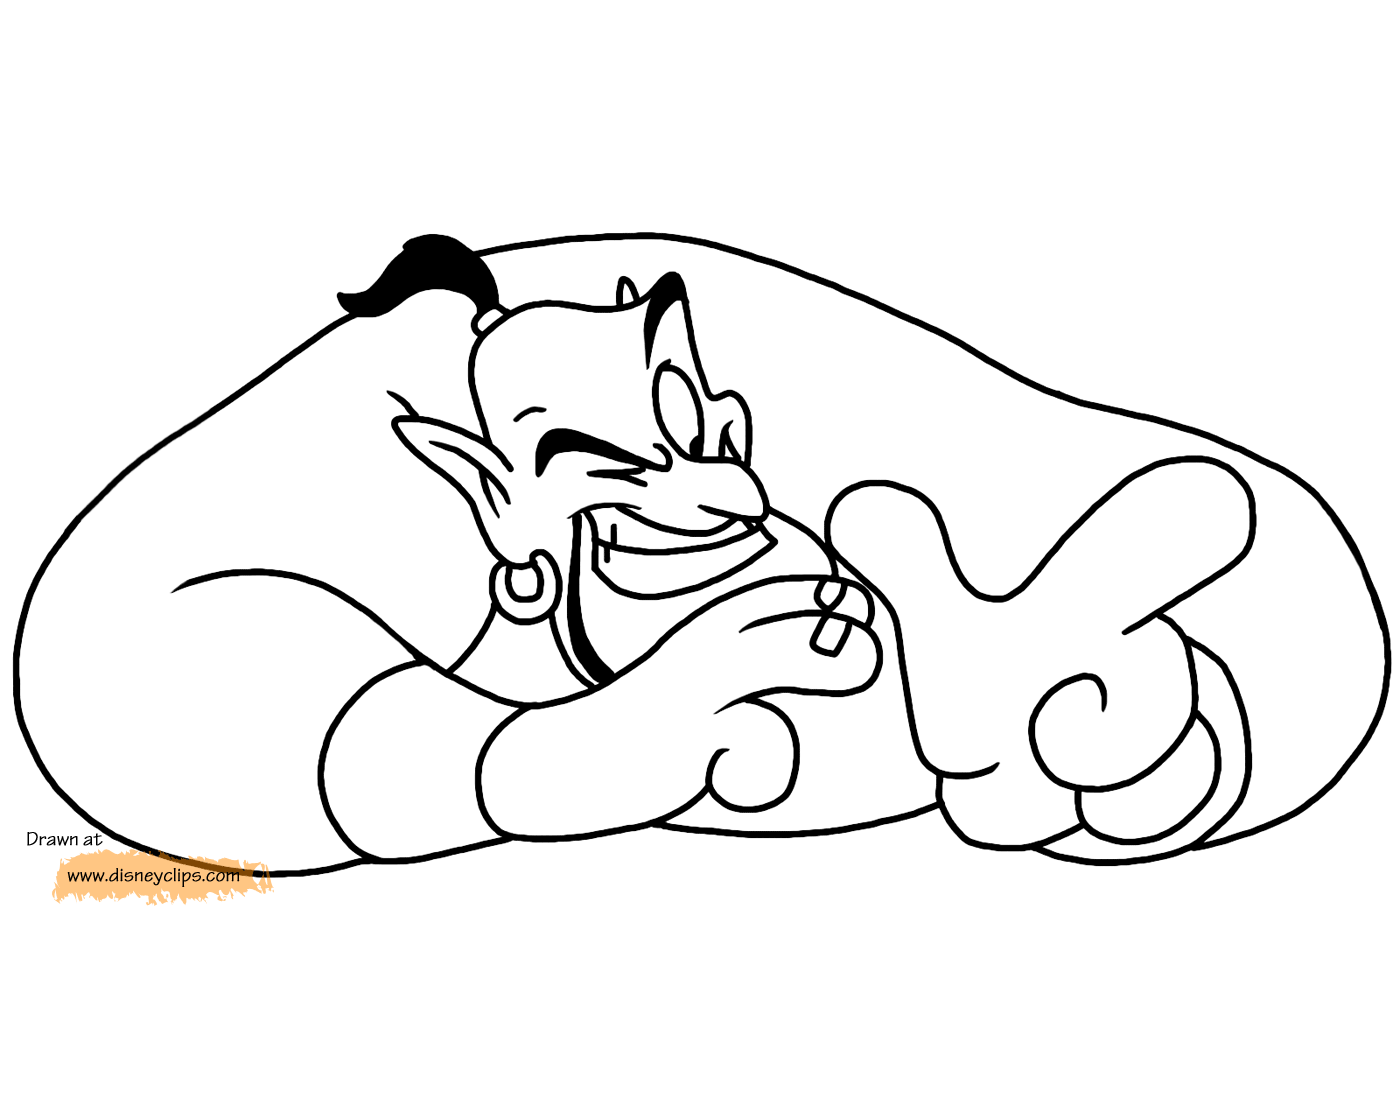 Download Disney's Aladdin Coloring Pages 3 | Disneyclips.com